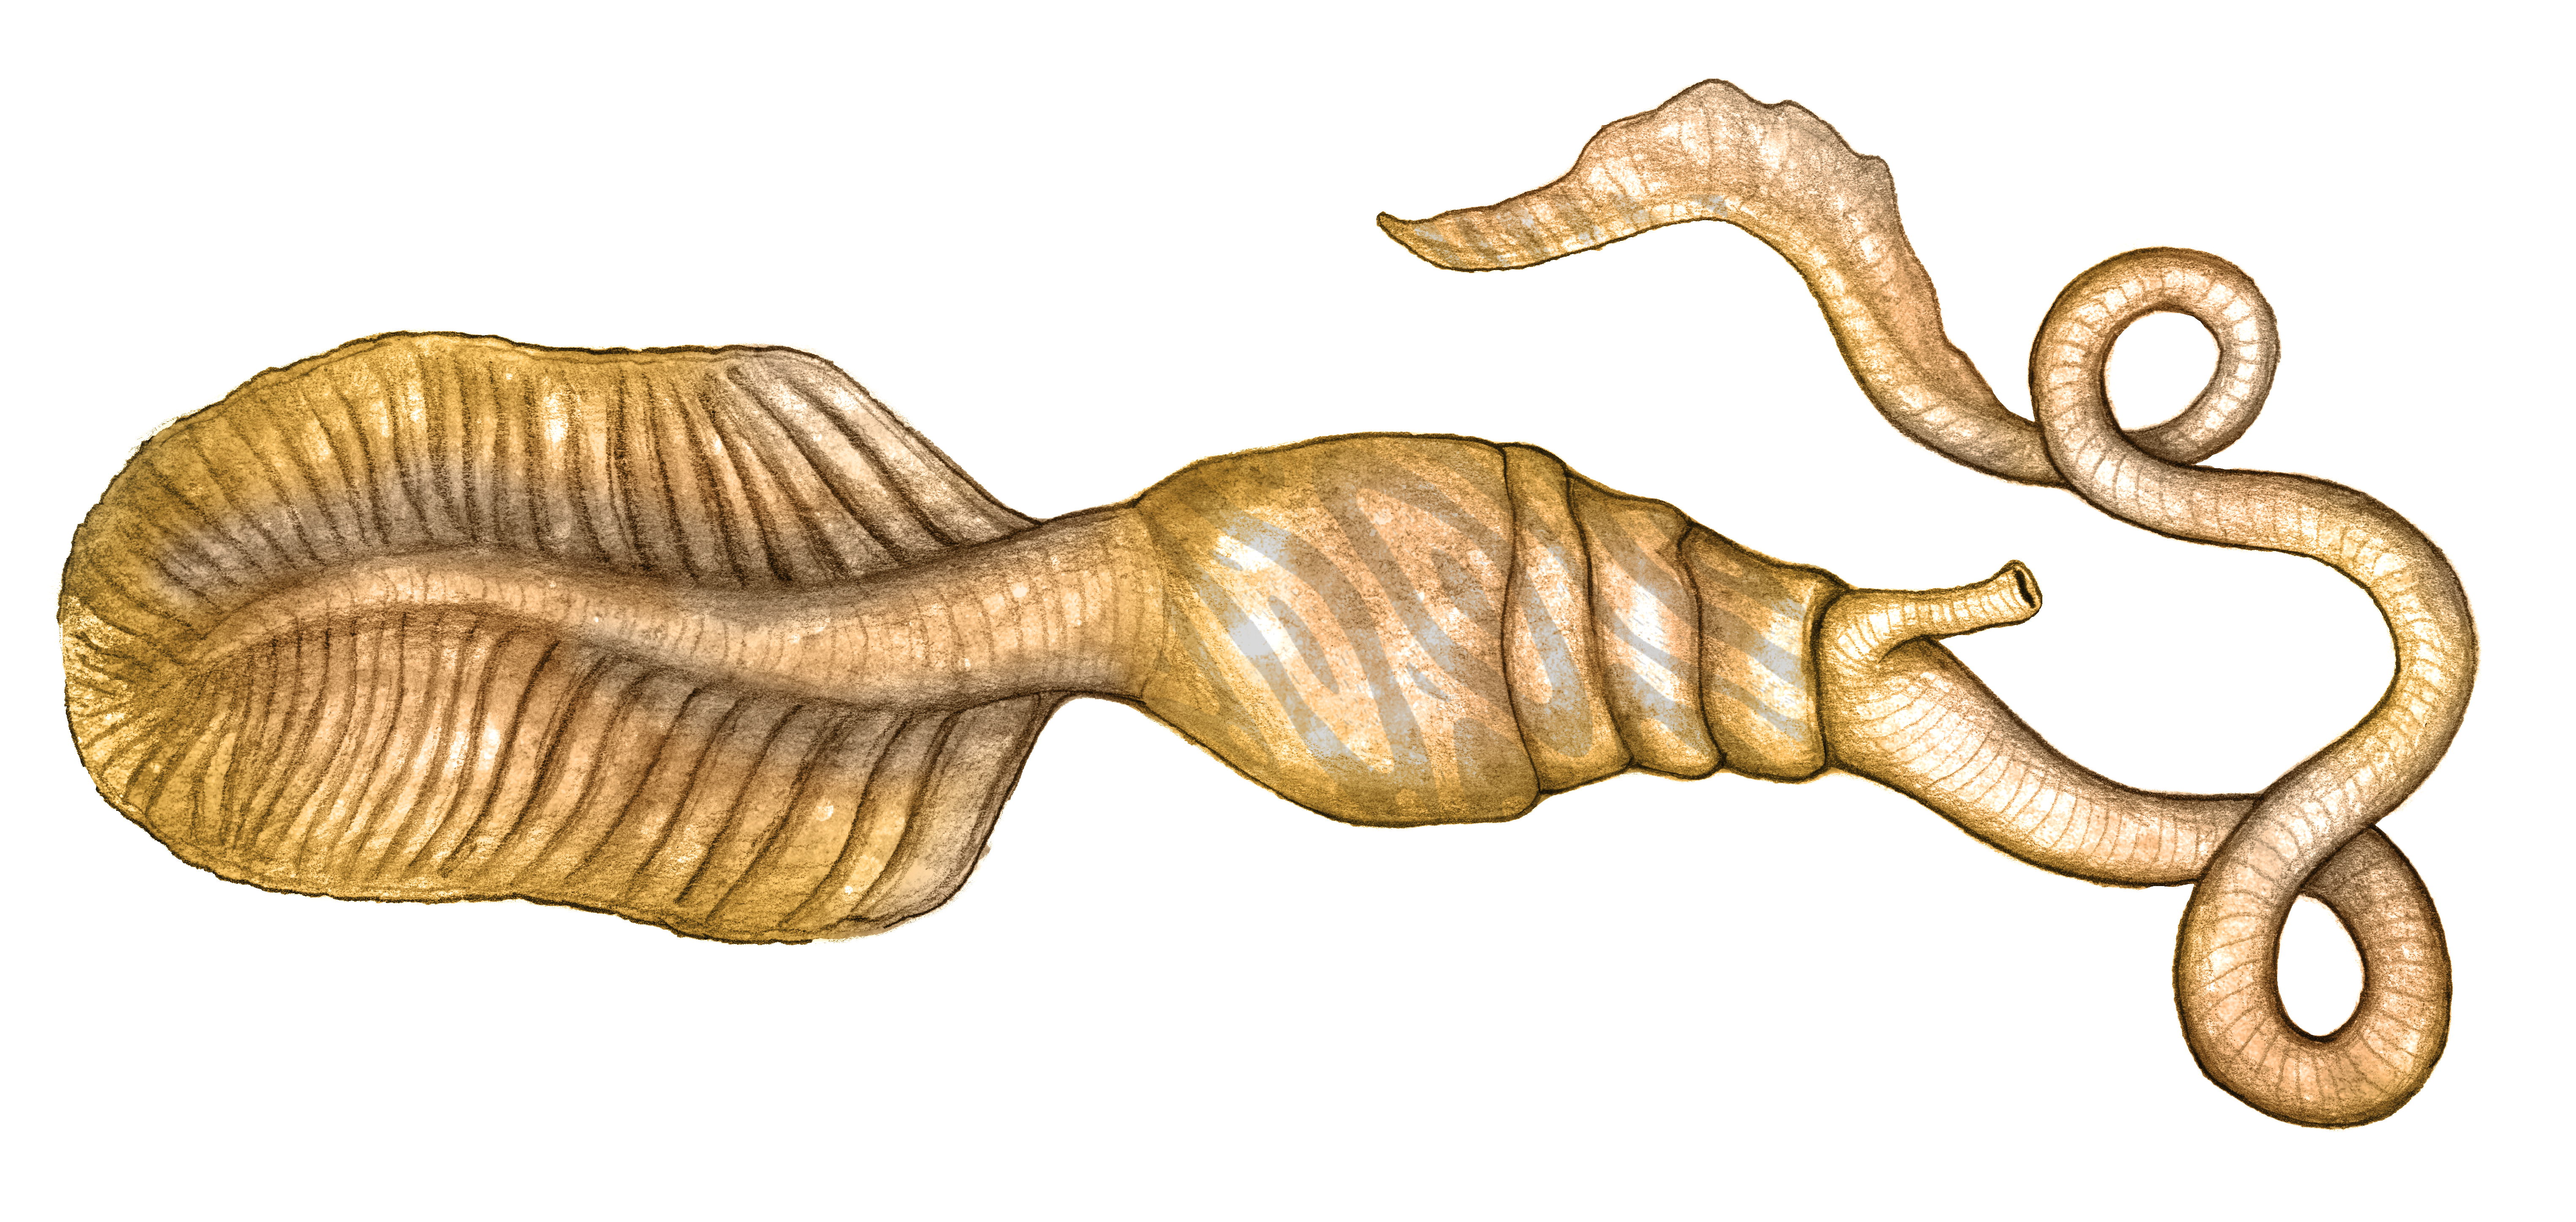 Introduction image displaying a dart worm